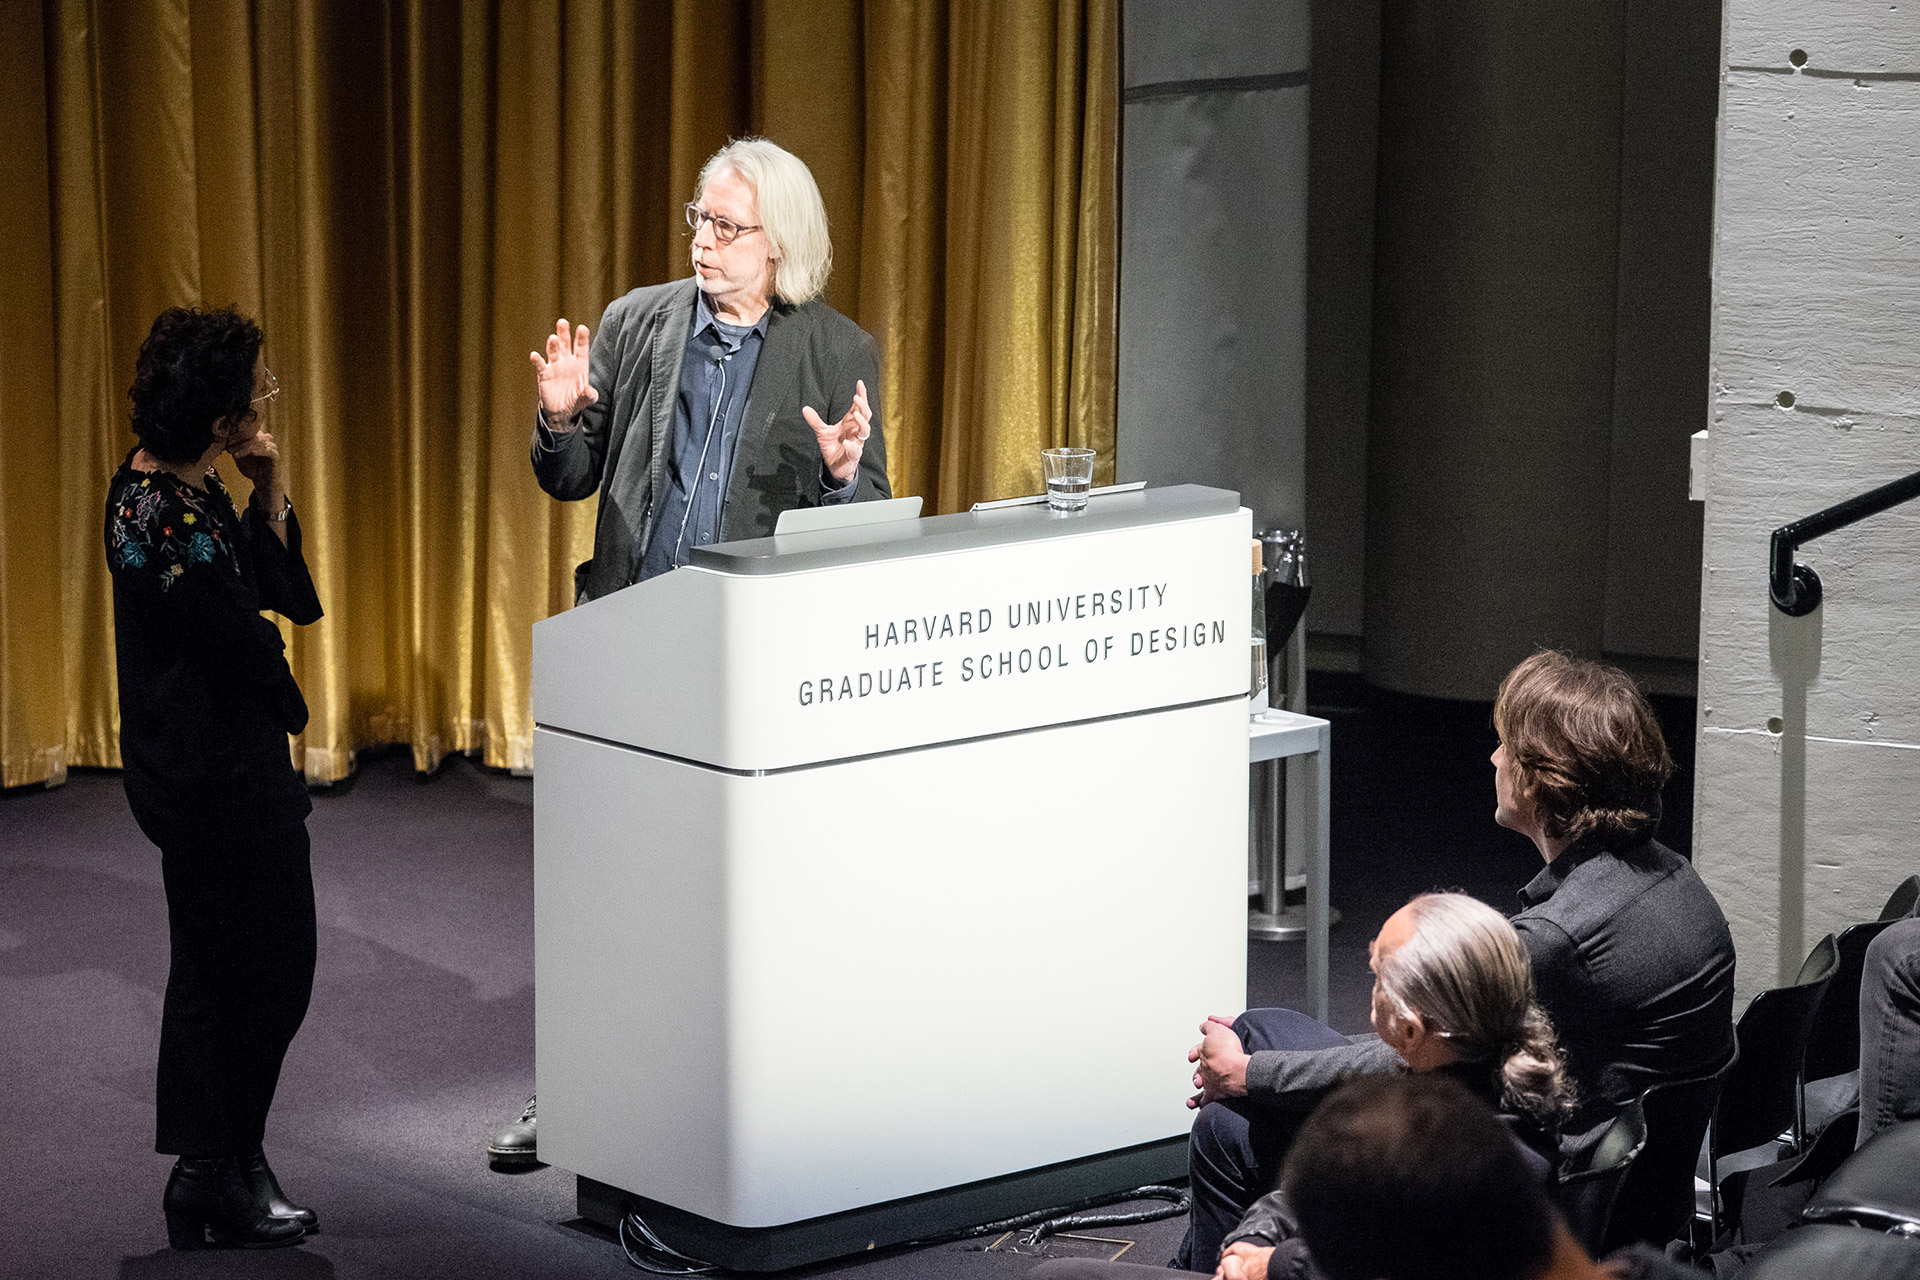 Rouse Visiting Artist Lecture: James Welling, “Pathological Color” 3